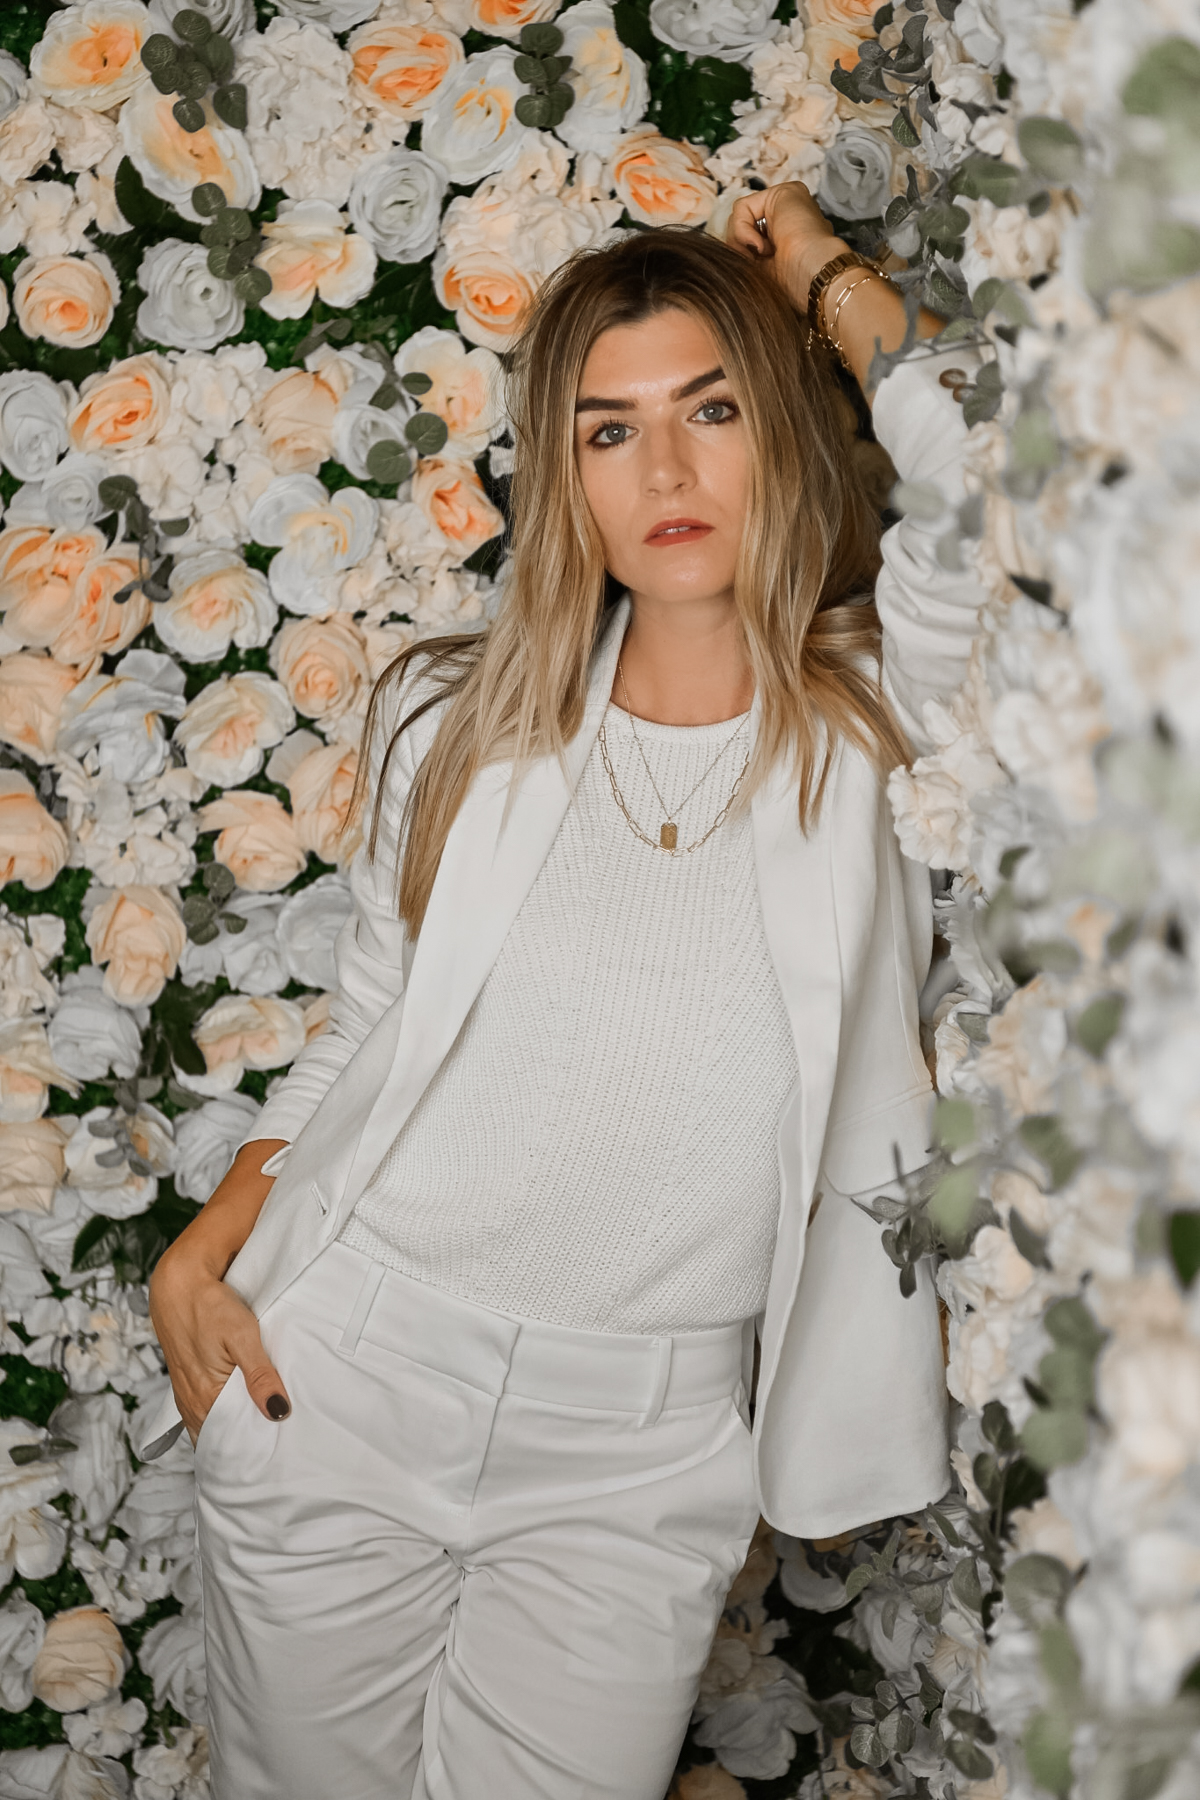 The Grey Edit - Cortney Bigelow - Lifestyle Blogger - Stylelogue - September Trend - Bright Tailored Suiting - Selfie Museum_Suit Your Selfie